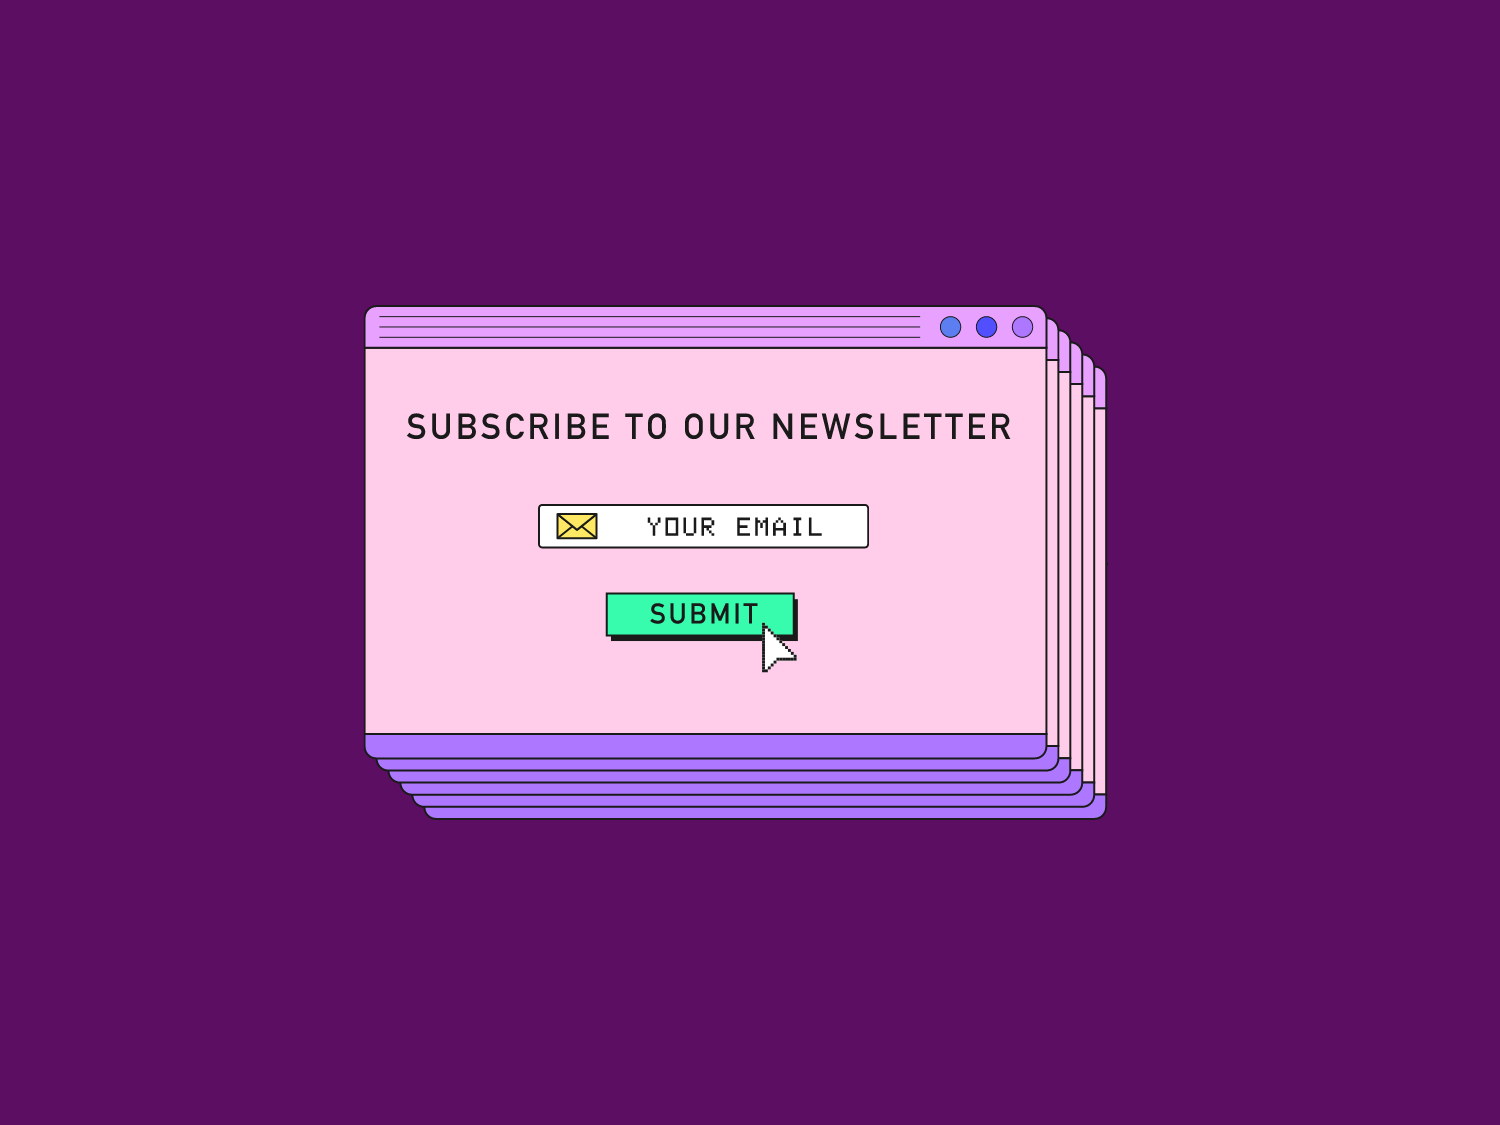 The purpose and benefits of sending out newsletters